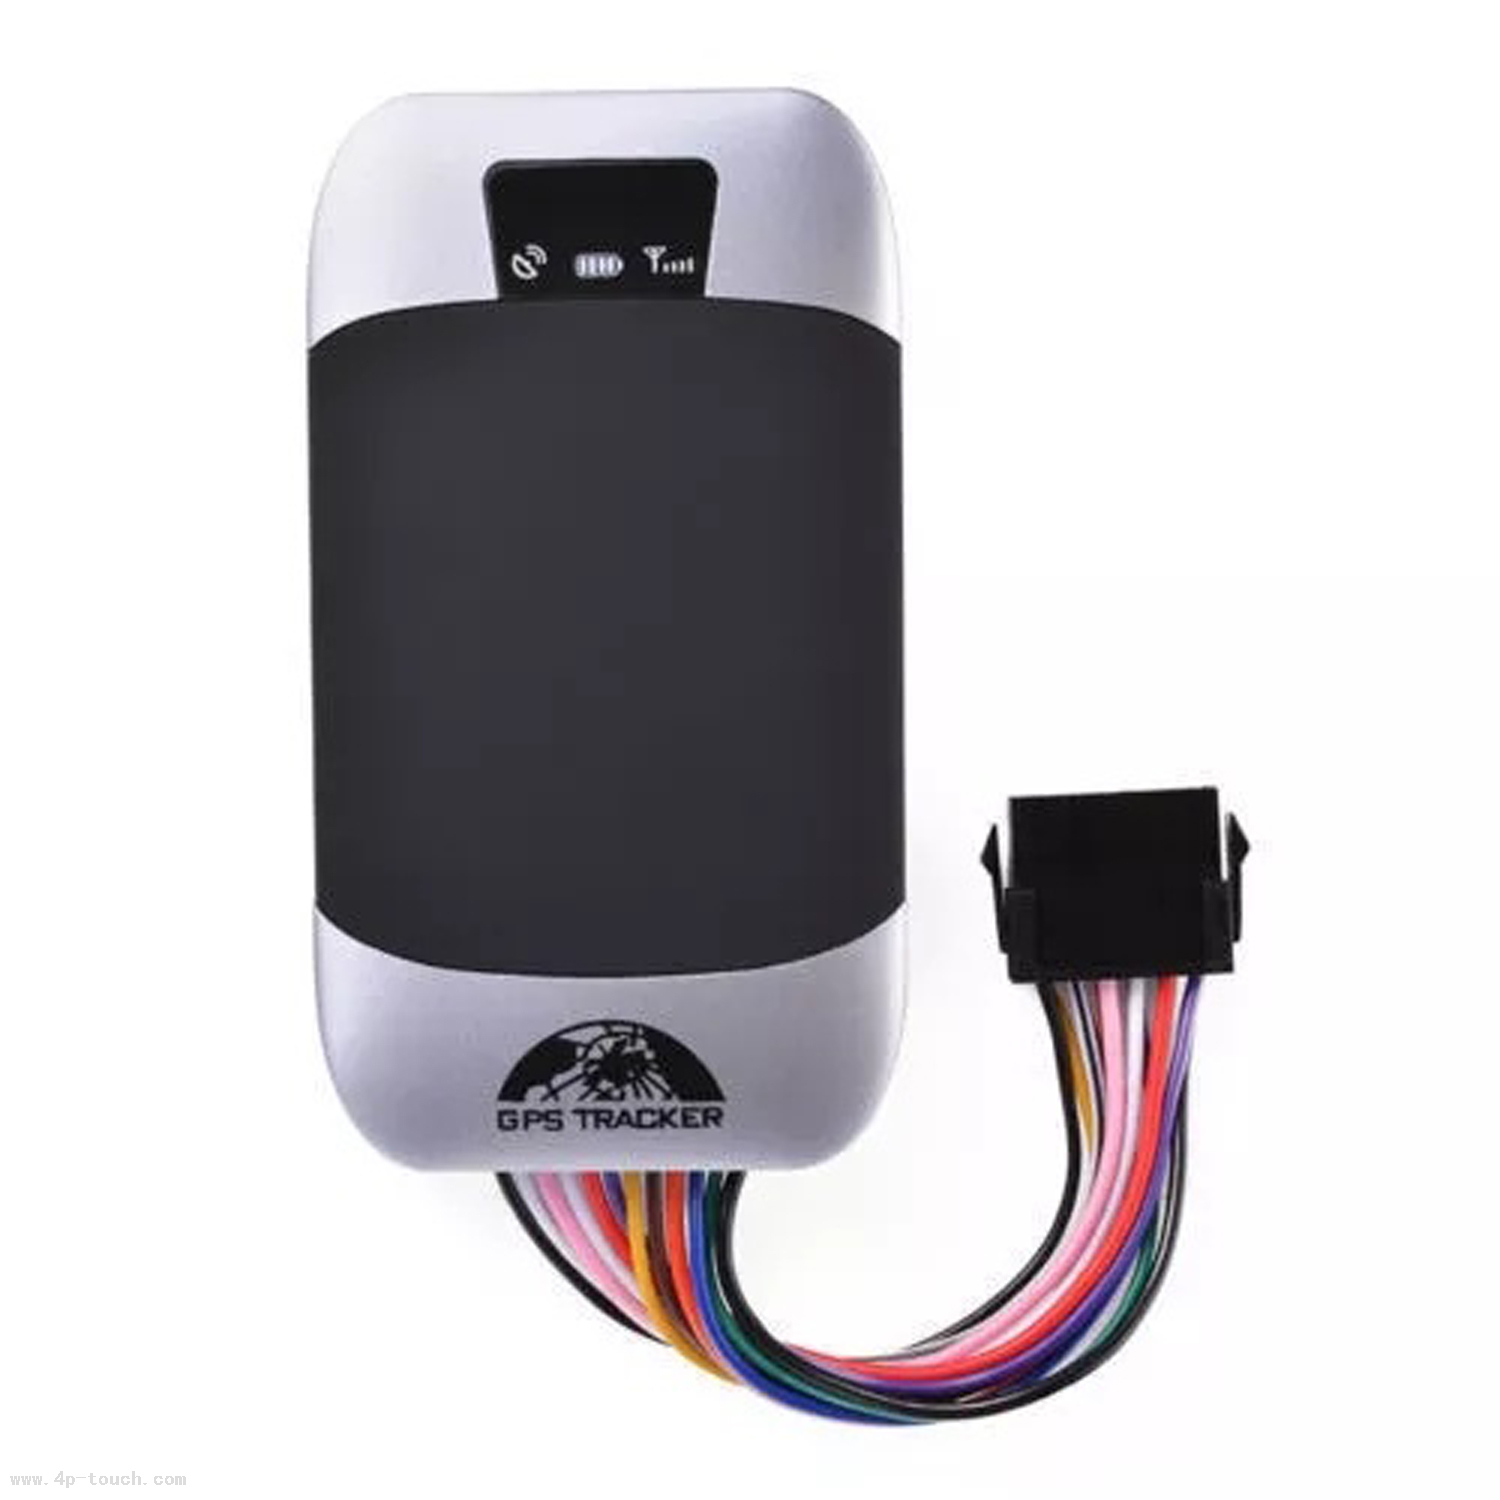 3G WCDMA IP67 Waterproof Car Trunk Motorcycle Vehicle GPS Tracker with Remote Cut off Petrol T33